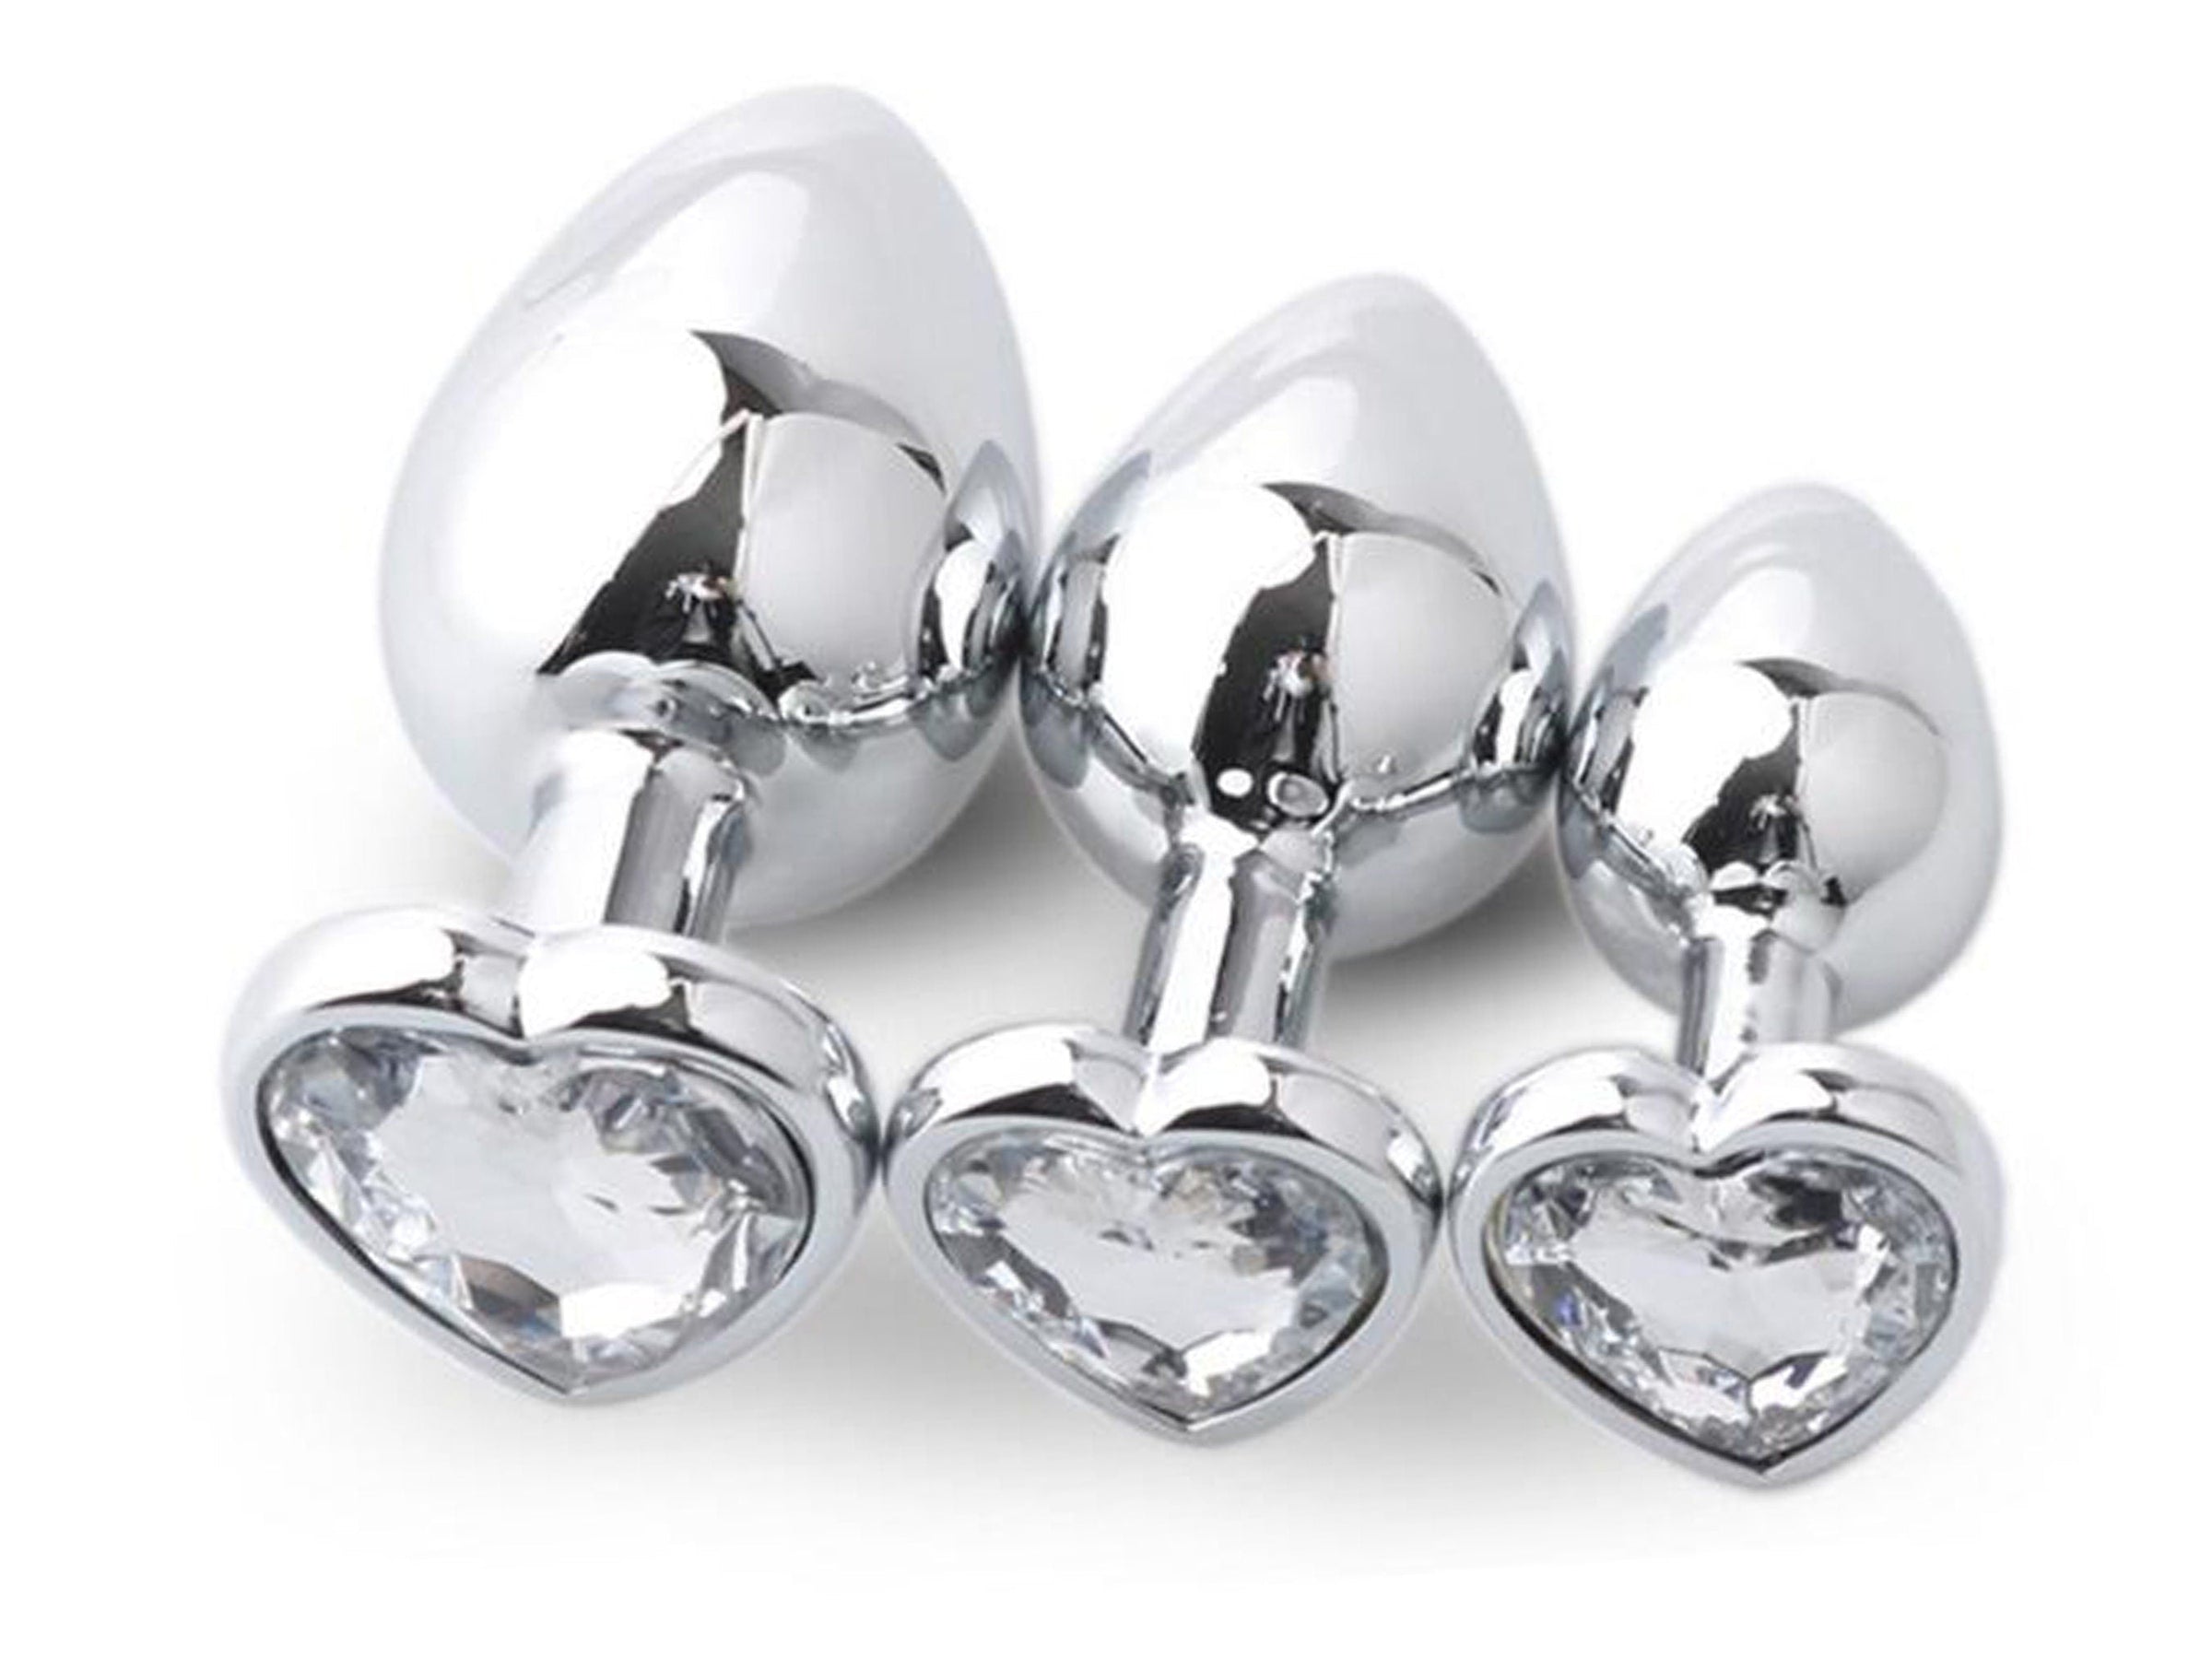 CLEAR White HEART SHAPED Acrylic Crystal Butt plug sizes anal toy picture